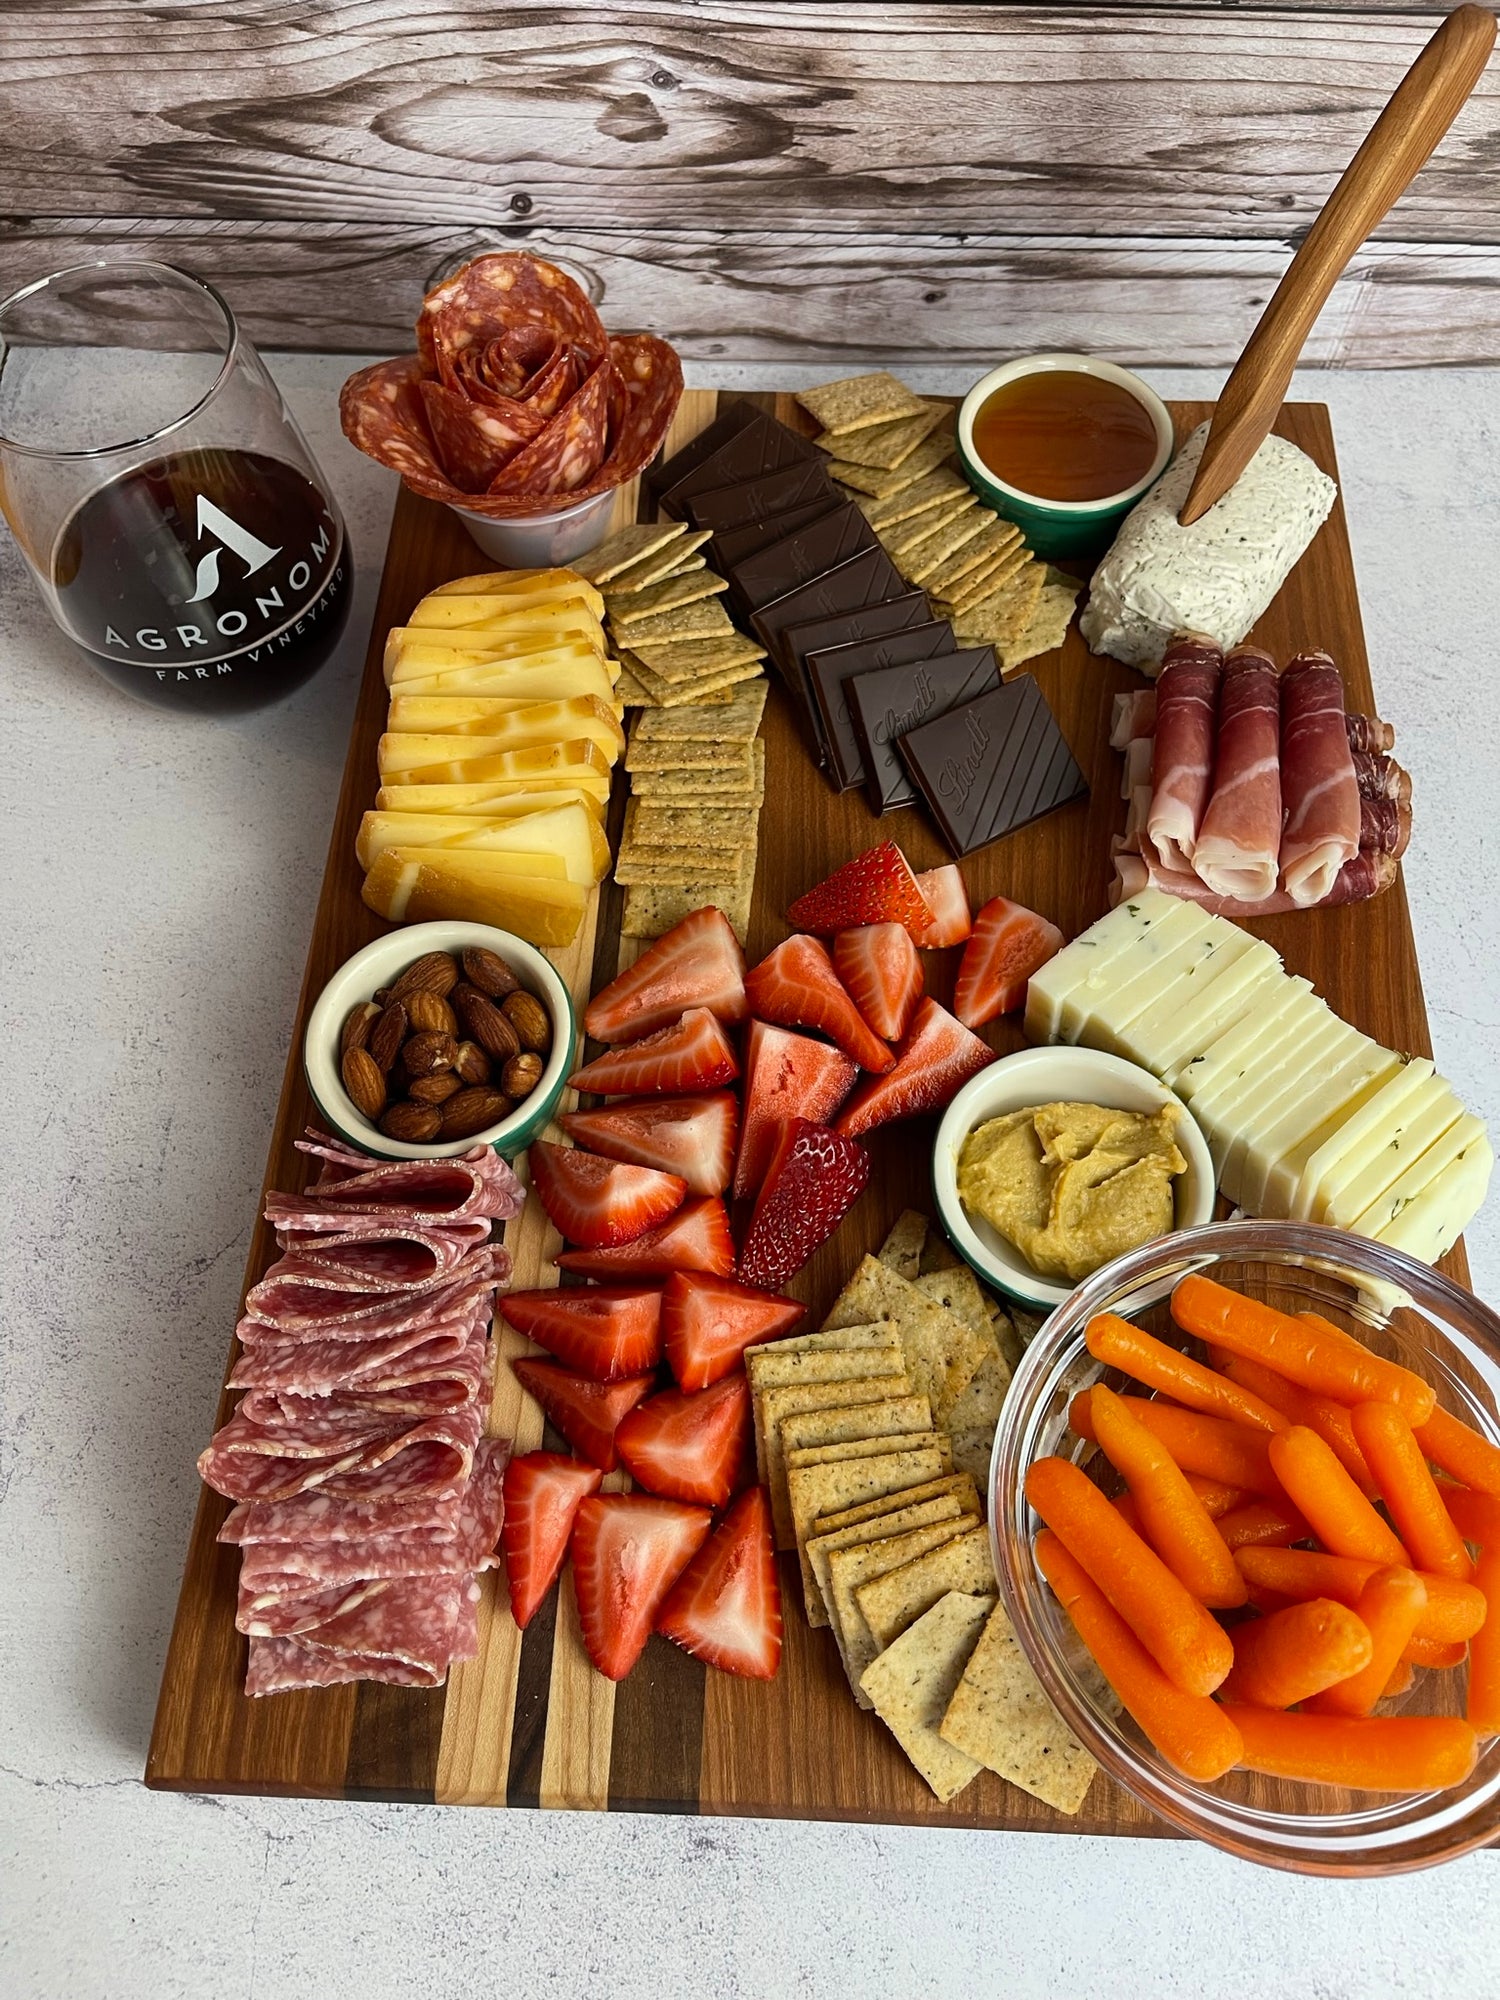 A colorful charcuterie board, covered in chopped fruit, deli meats, cheese and dips